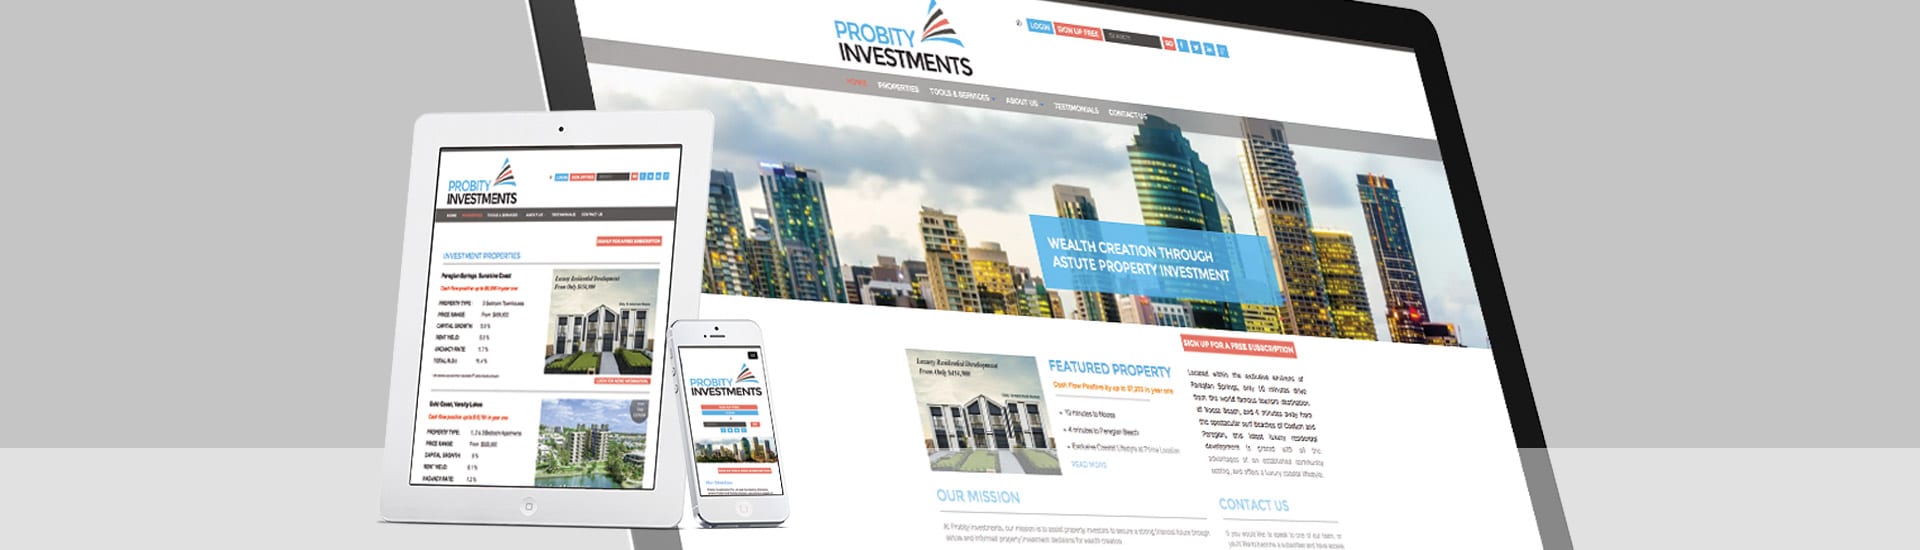 Probity Investments Website Design